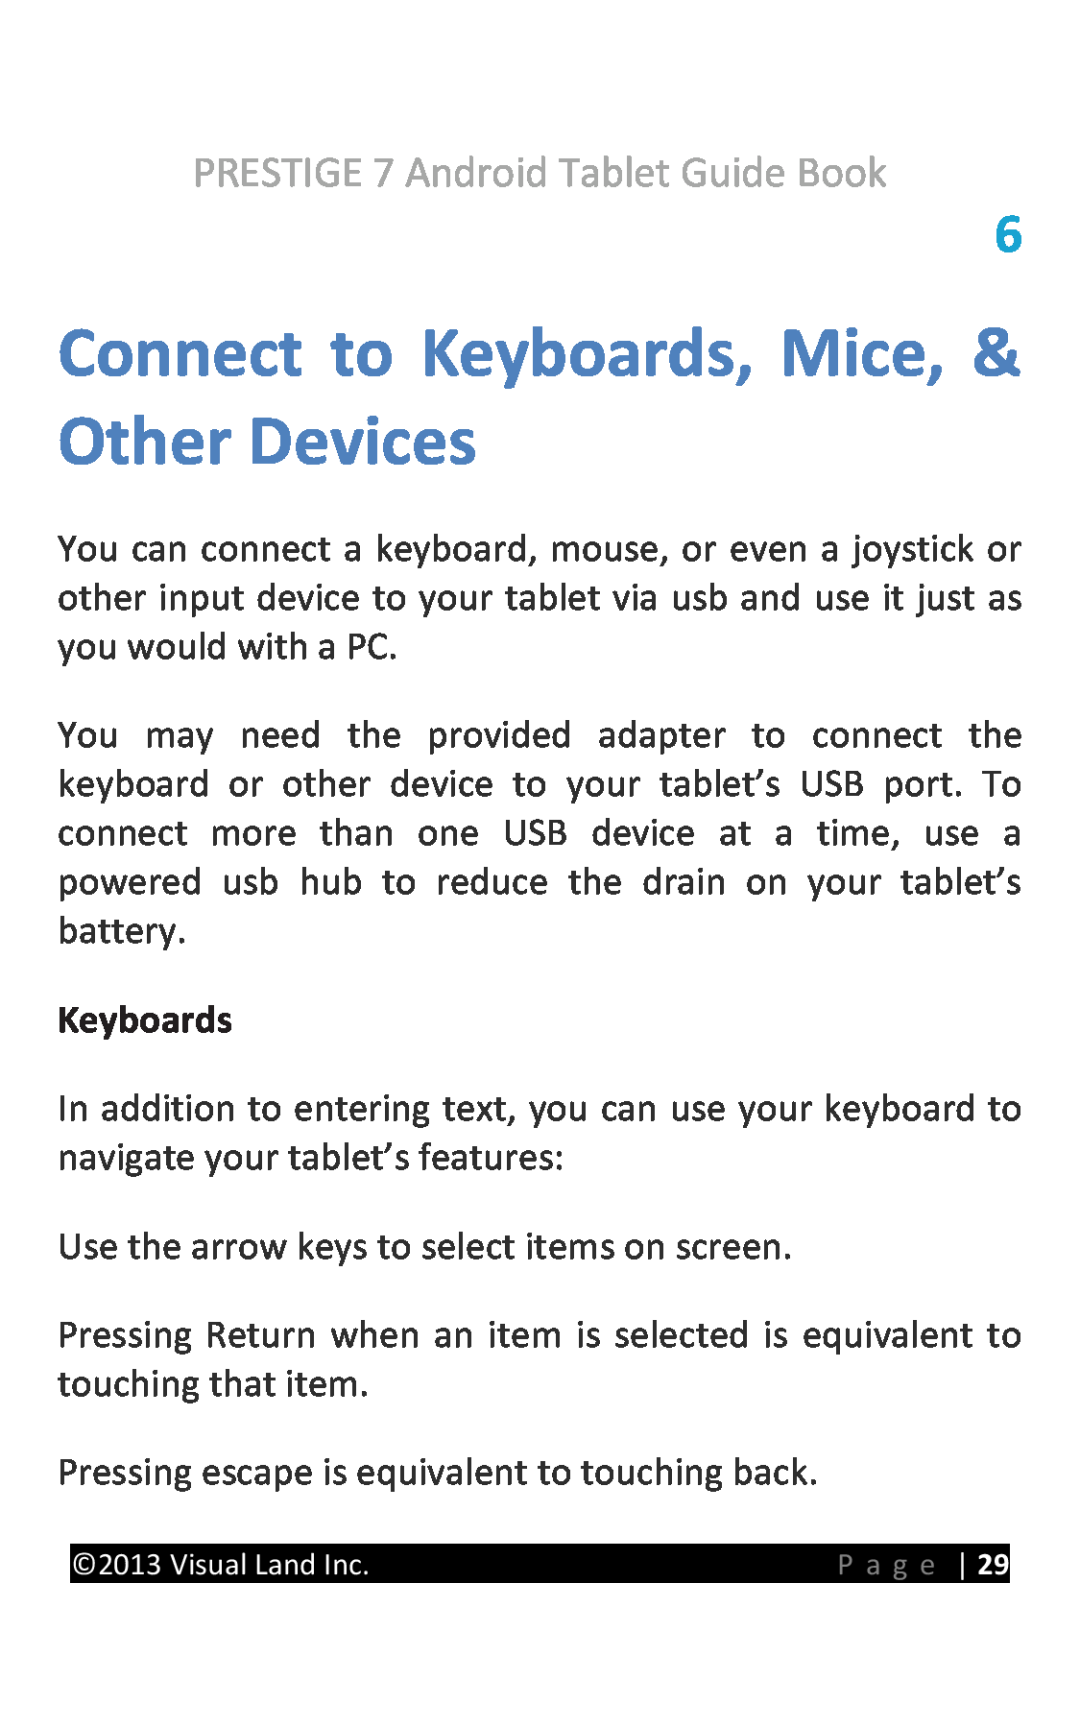 Visual Land 7D8TCBLK manual Connect to Keyboards, Mice, & Other Devices, PRESTIGE 7 Android Tablet Guide Book 